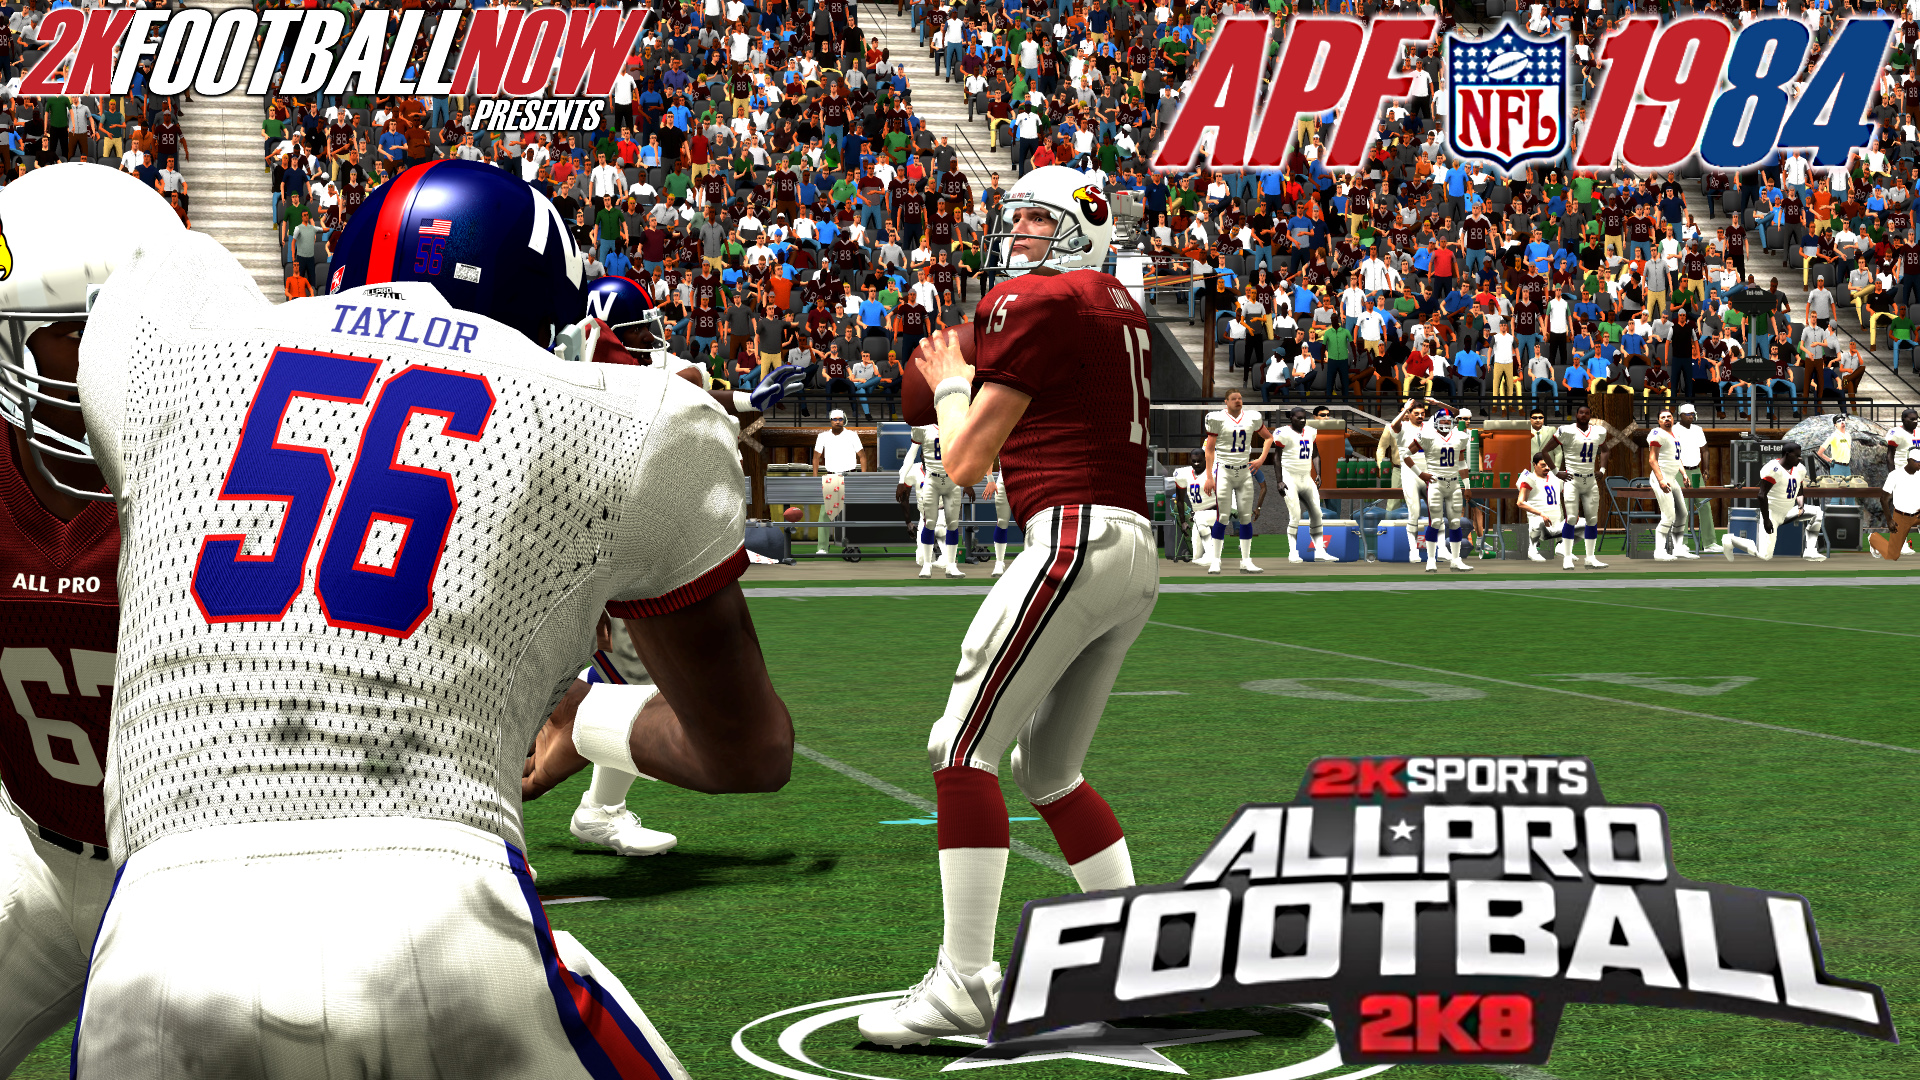 2k Football Now on X: 'All Pro Football 2K8 - NFL 1984: Kickoff Week 1  Matchup: New York Giants Vs St. Louis Cardinals    / X